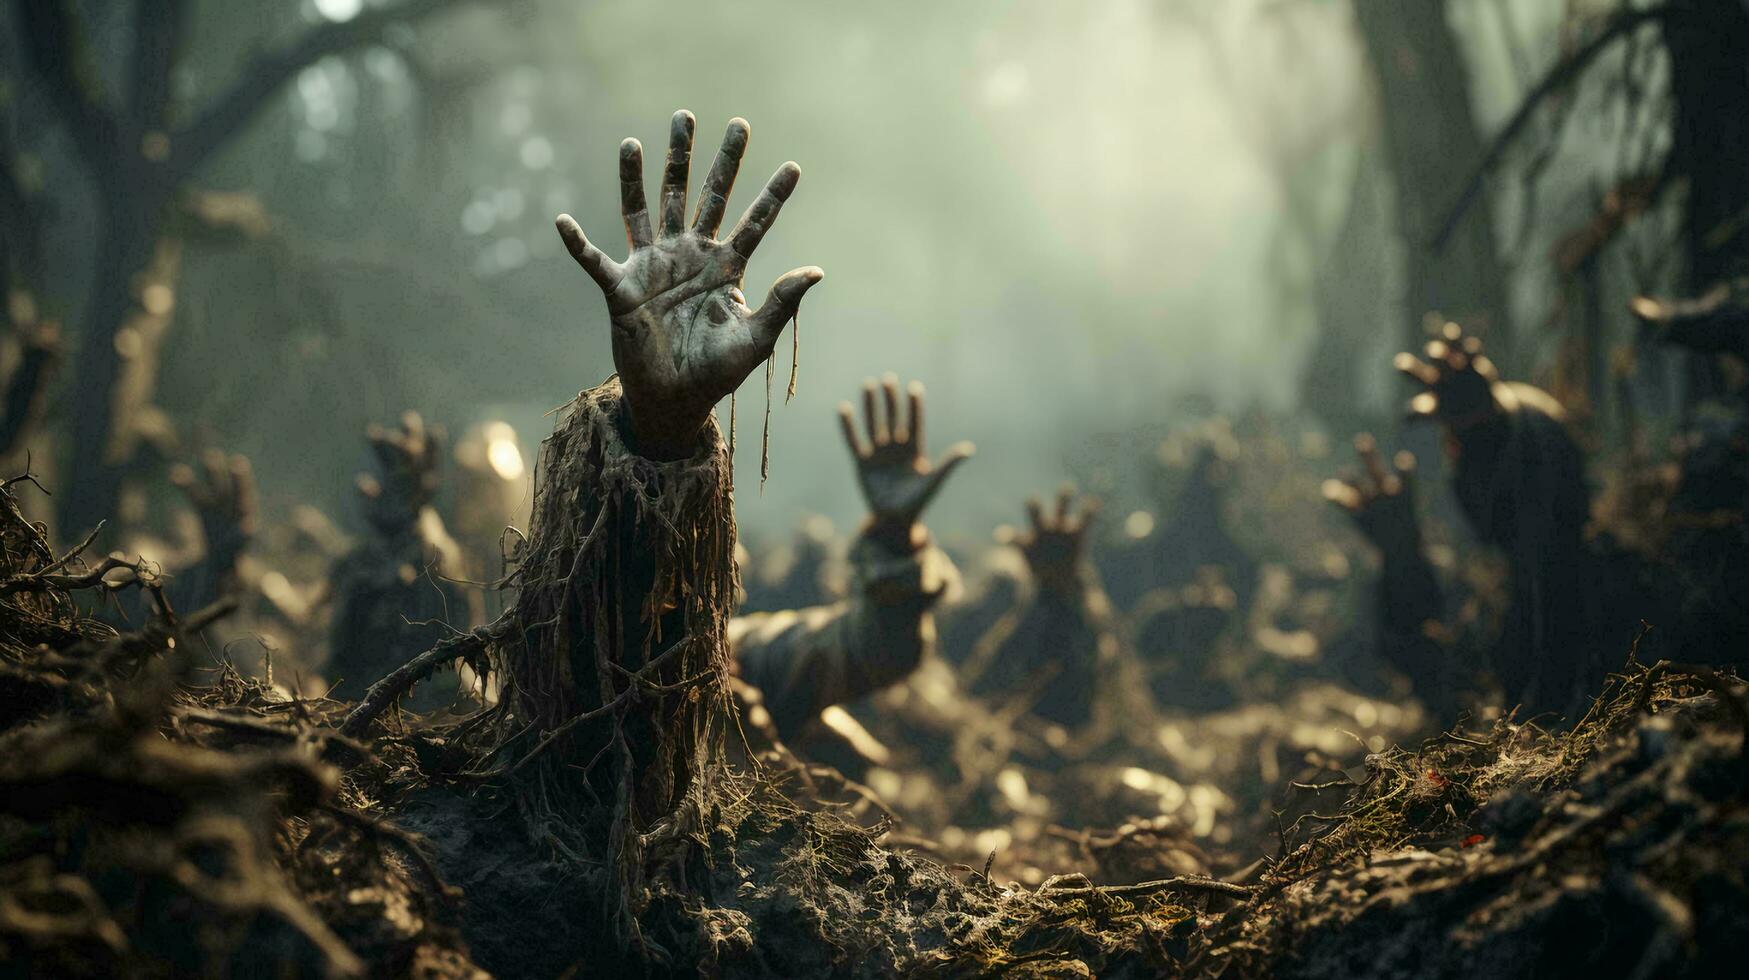 Zombies rise from the dead in a dark scary forest at night and pull their hands out of the ground for the Halloween holiday photo